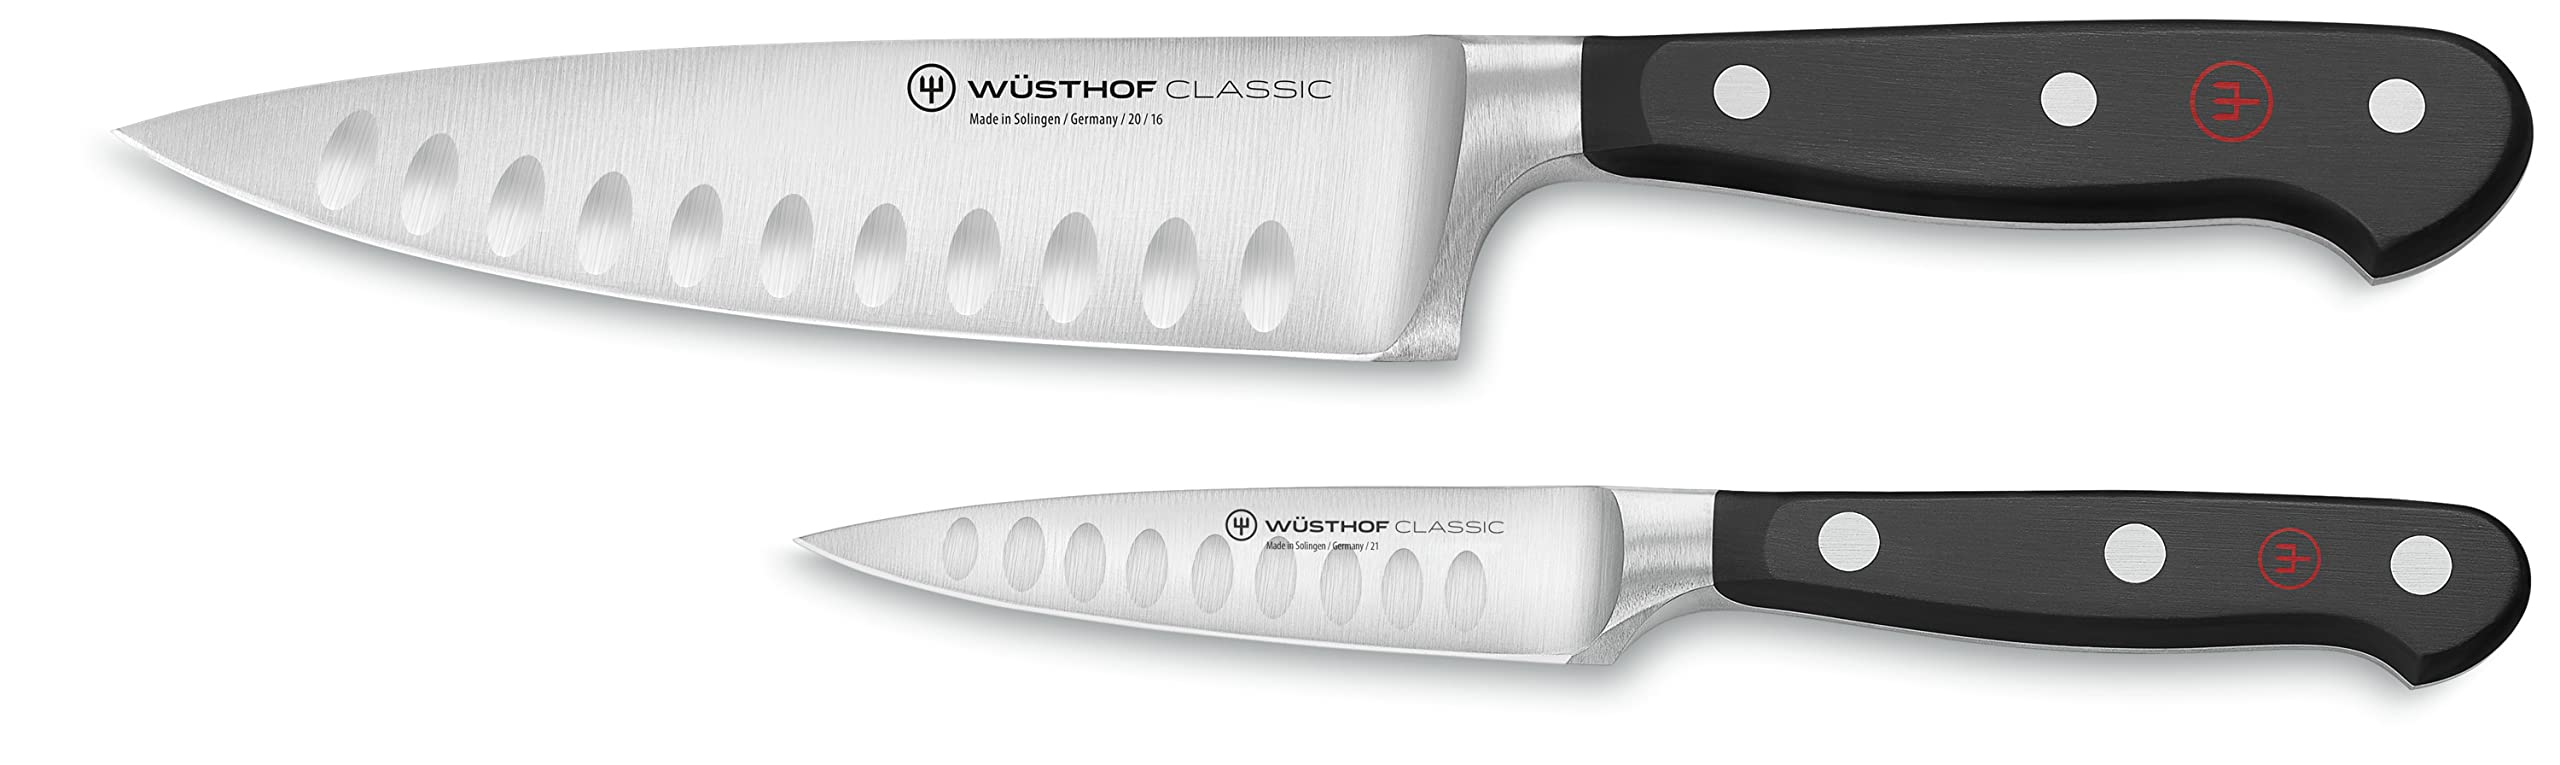 Wüsthof Classic Hollow Edge 2-Piece Chef's Knife Set, Black, 6 nd 3.5-inch - 6-inch and 3.5-inch